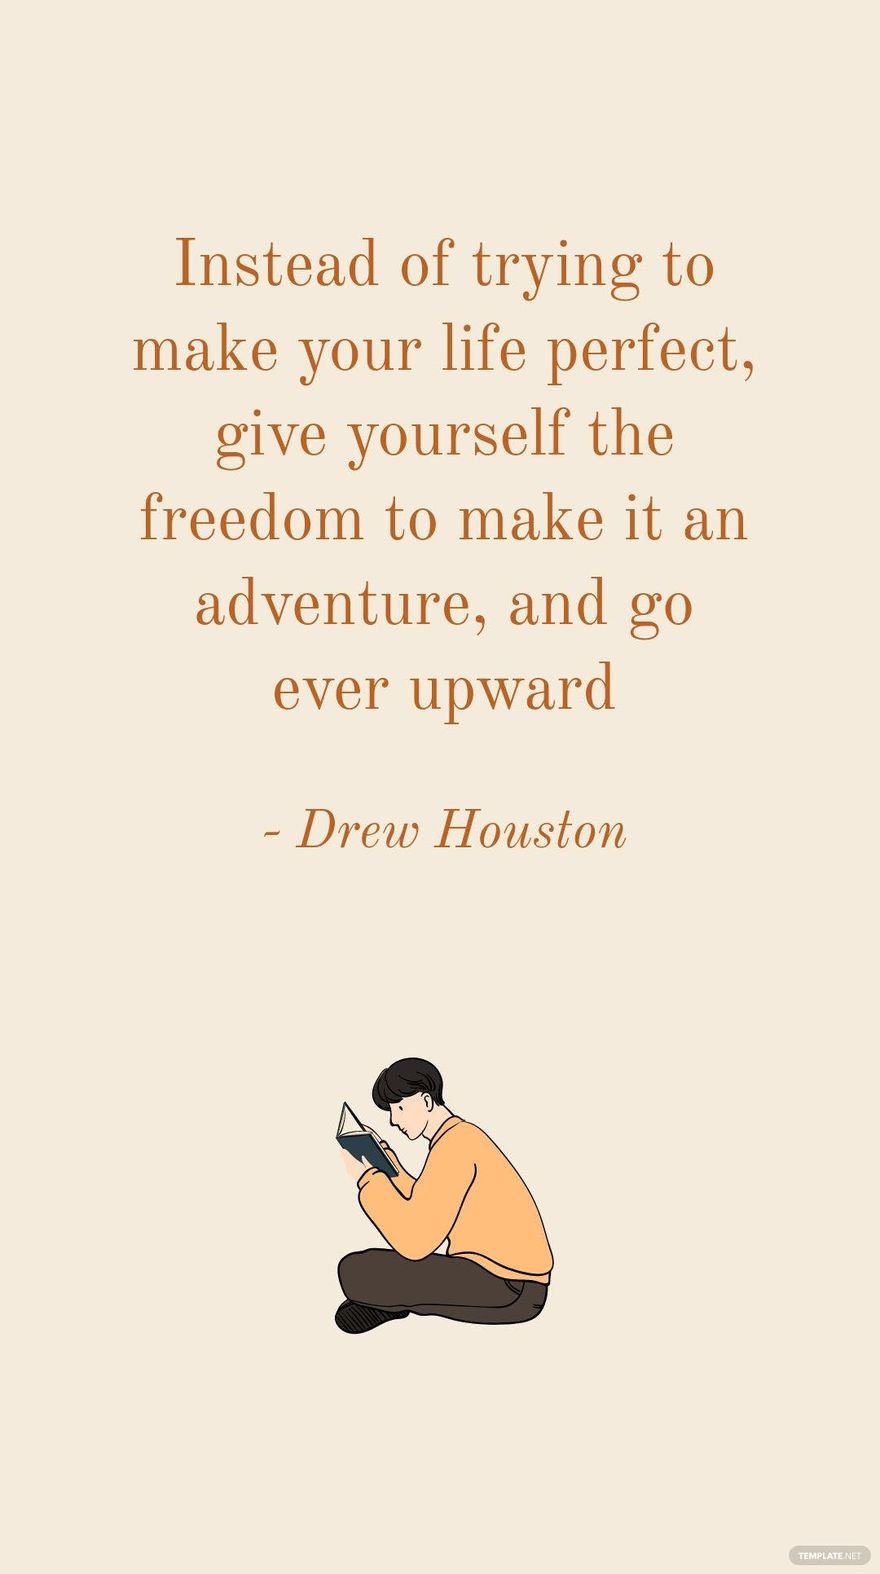 Drew Houston - Instead of trying to make your life perfect, give yourself the freedom to make it an adventure, and go ever upward in JPG